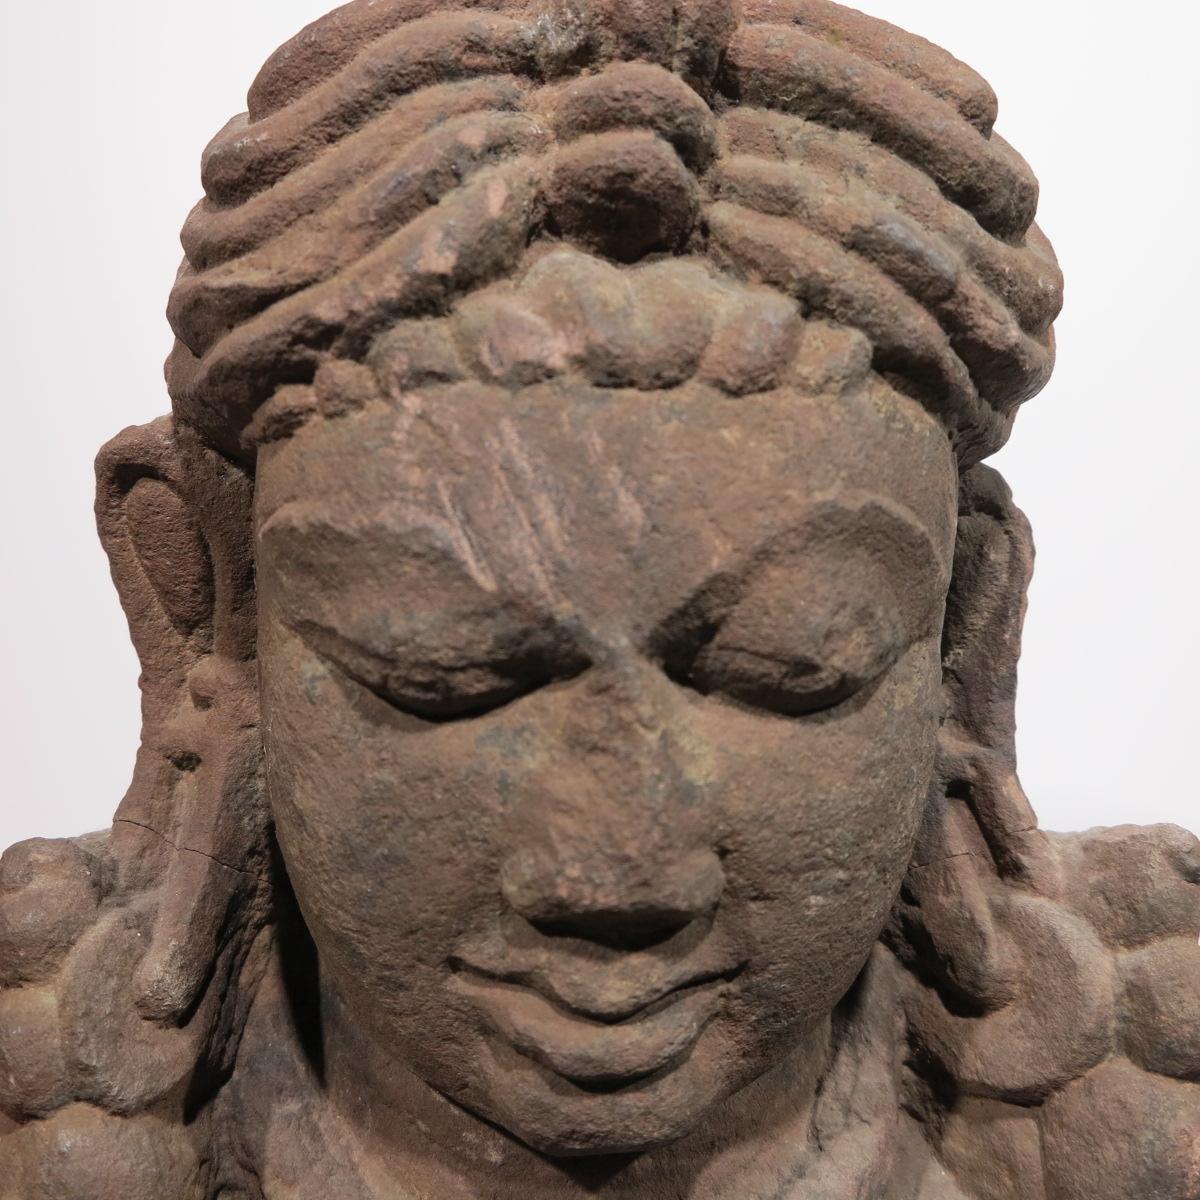 Beautiful Head of Indian Goddess, possibly Gupta. Cental india, 6th-8th century. Measures h. 12.5 inches, w. 9 inches, d. 4.25 inches. Measures 16 x 10.25 x 6.5 with wood stand. 